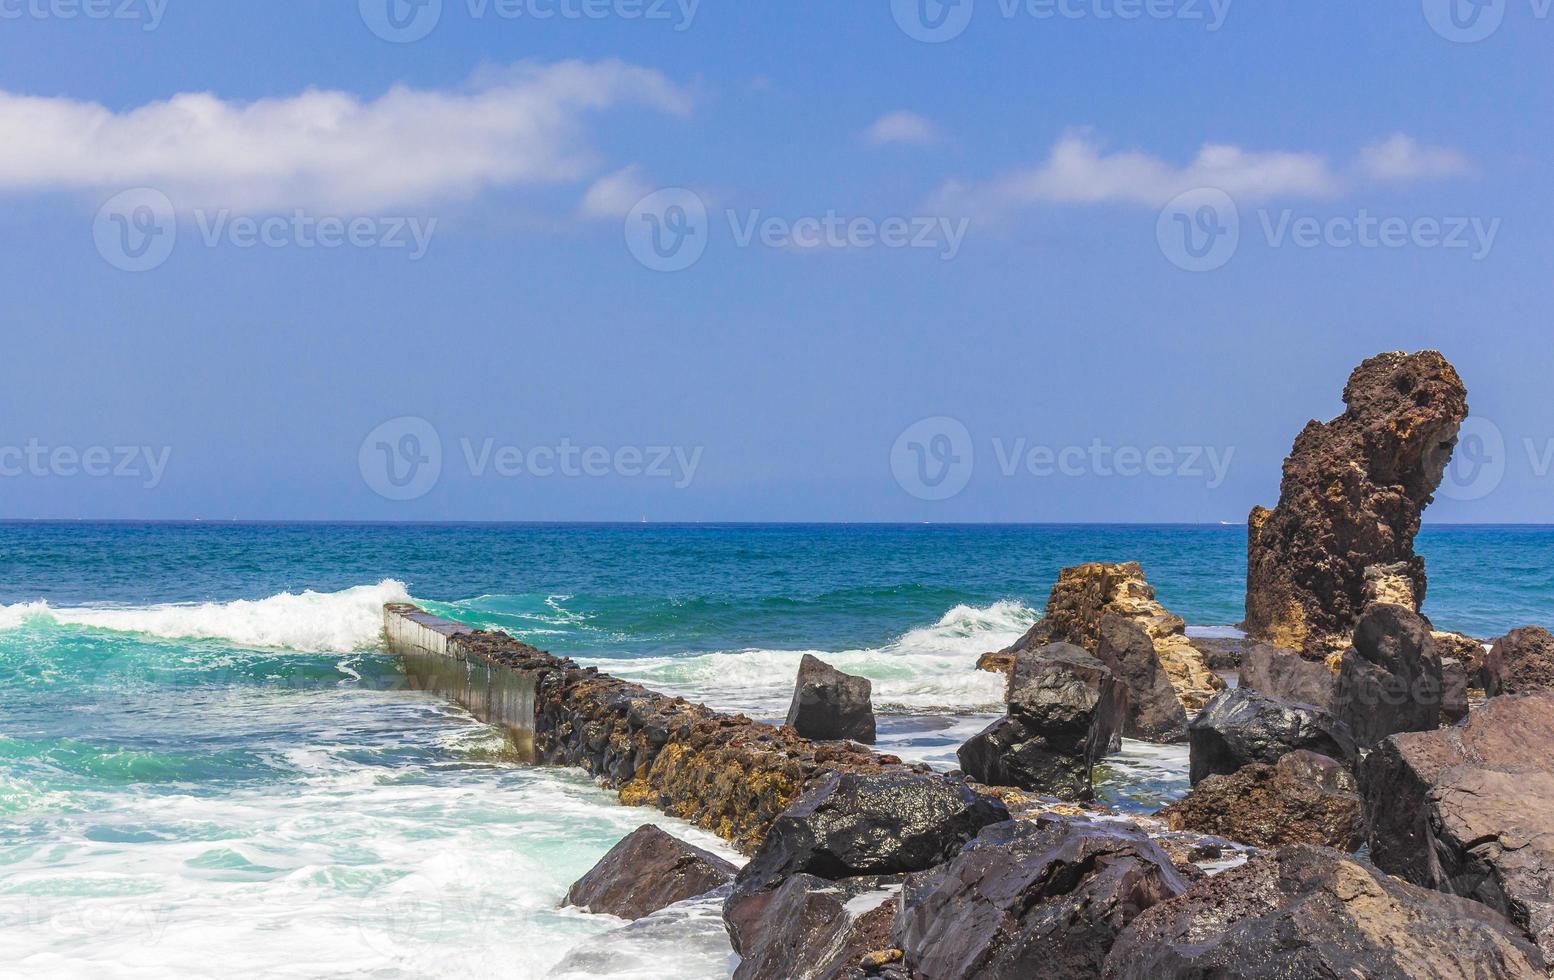 The Atlantic Ocean at Tenerife, on the Canary islands, 2014 photo